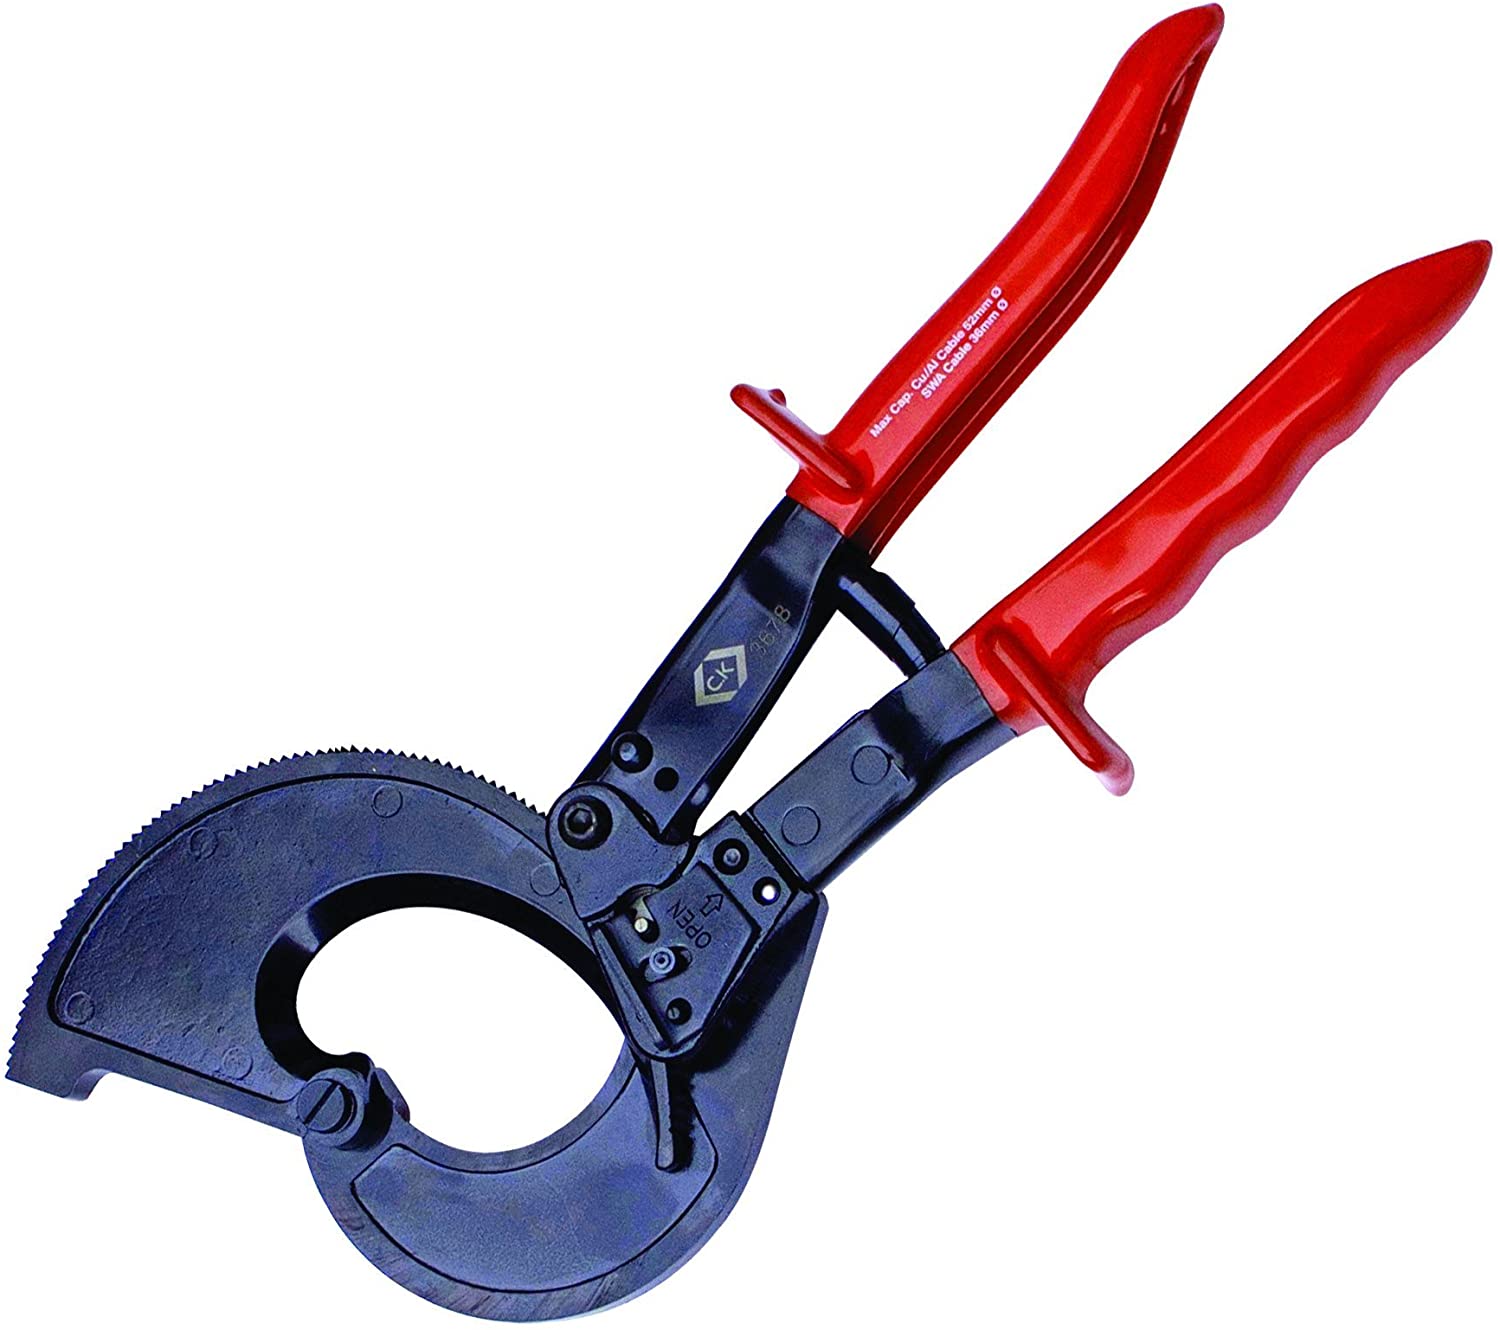 C.K Tools T3678 Heavy Duty Ratchet Cable Cutter, up to 52mmØ